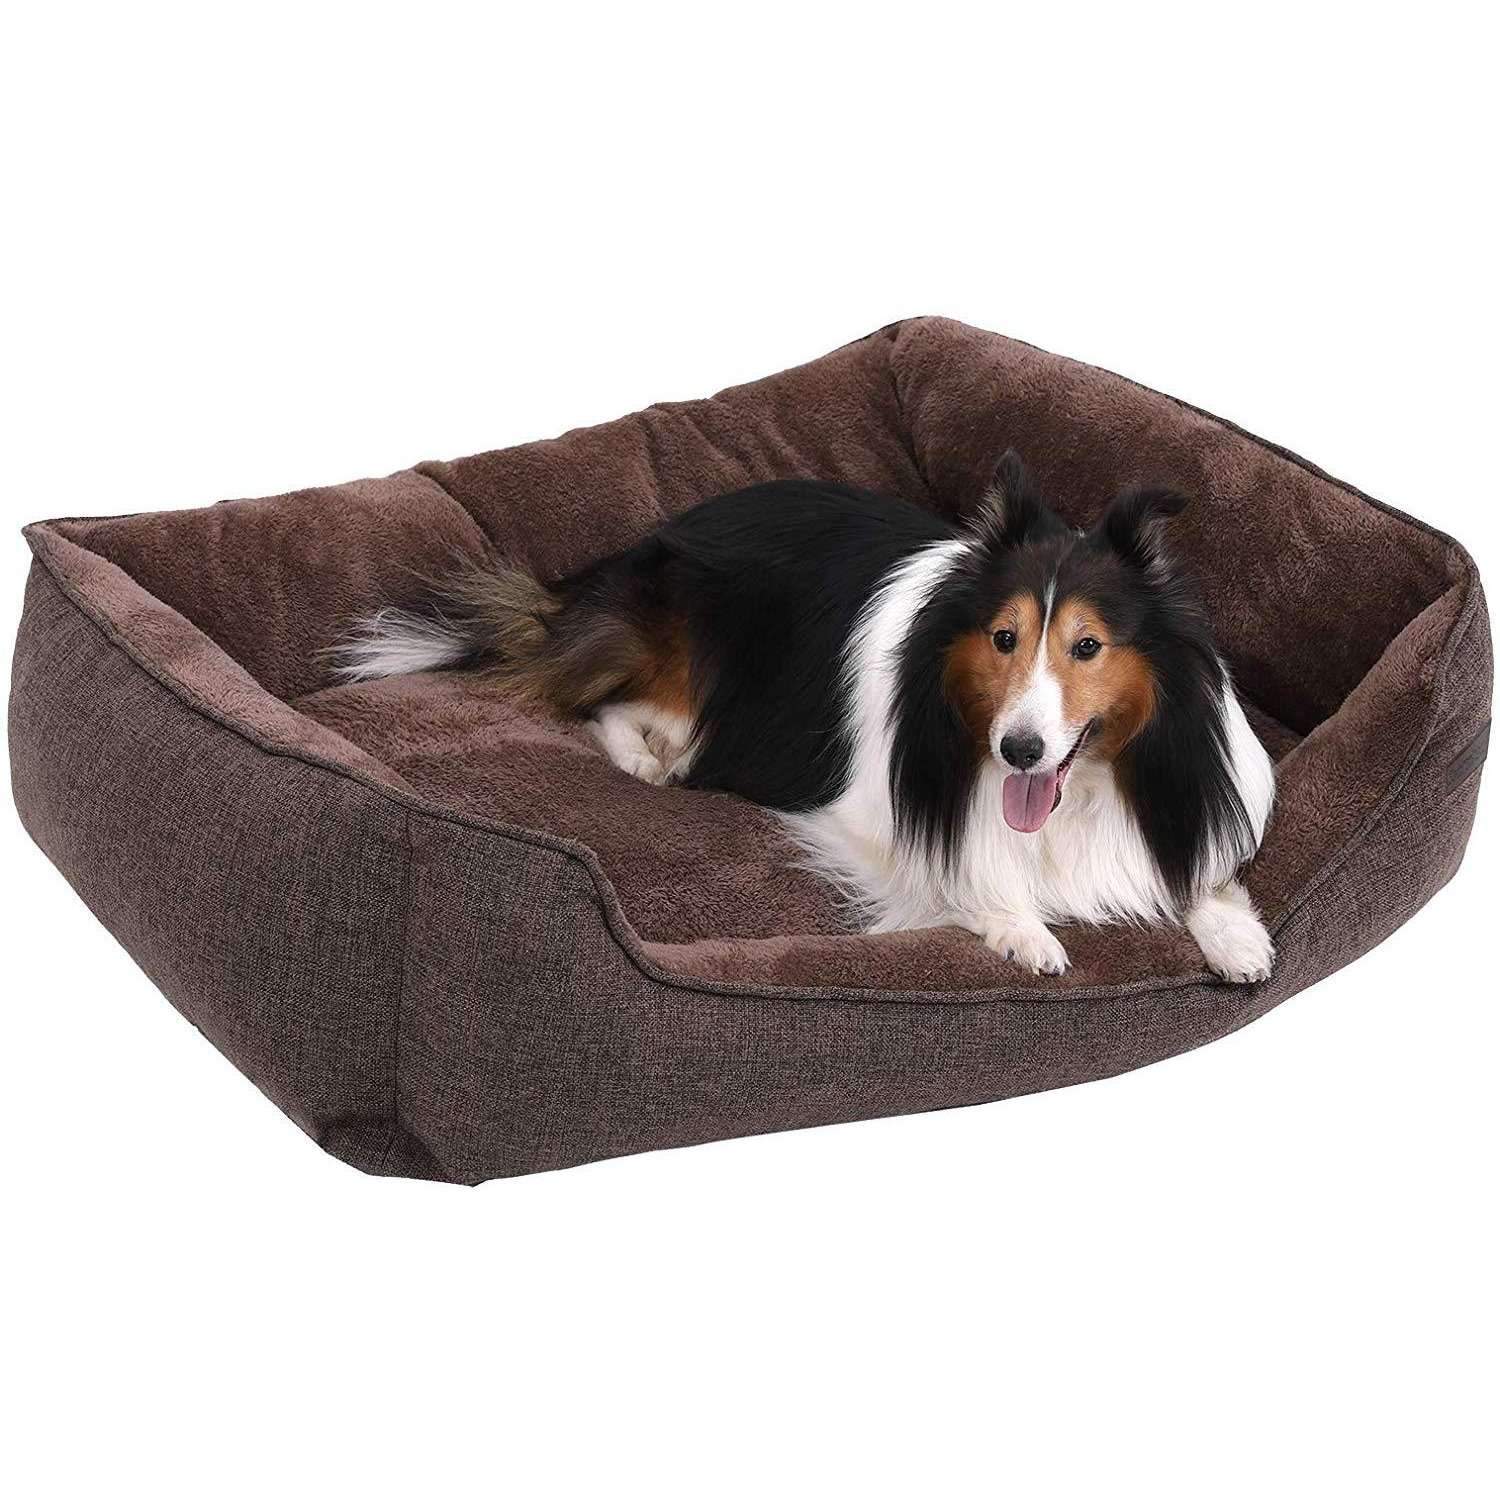 Nancy's XL Dog Bed Washable - Dog Bed - Removable Cover - Dog Beds